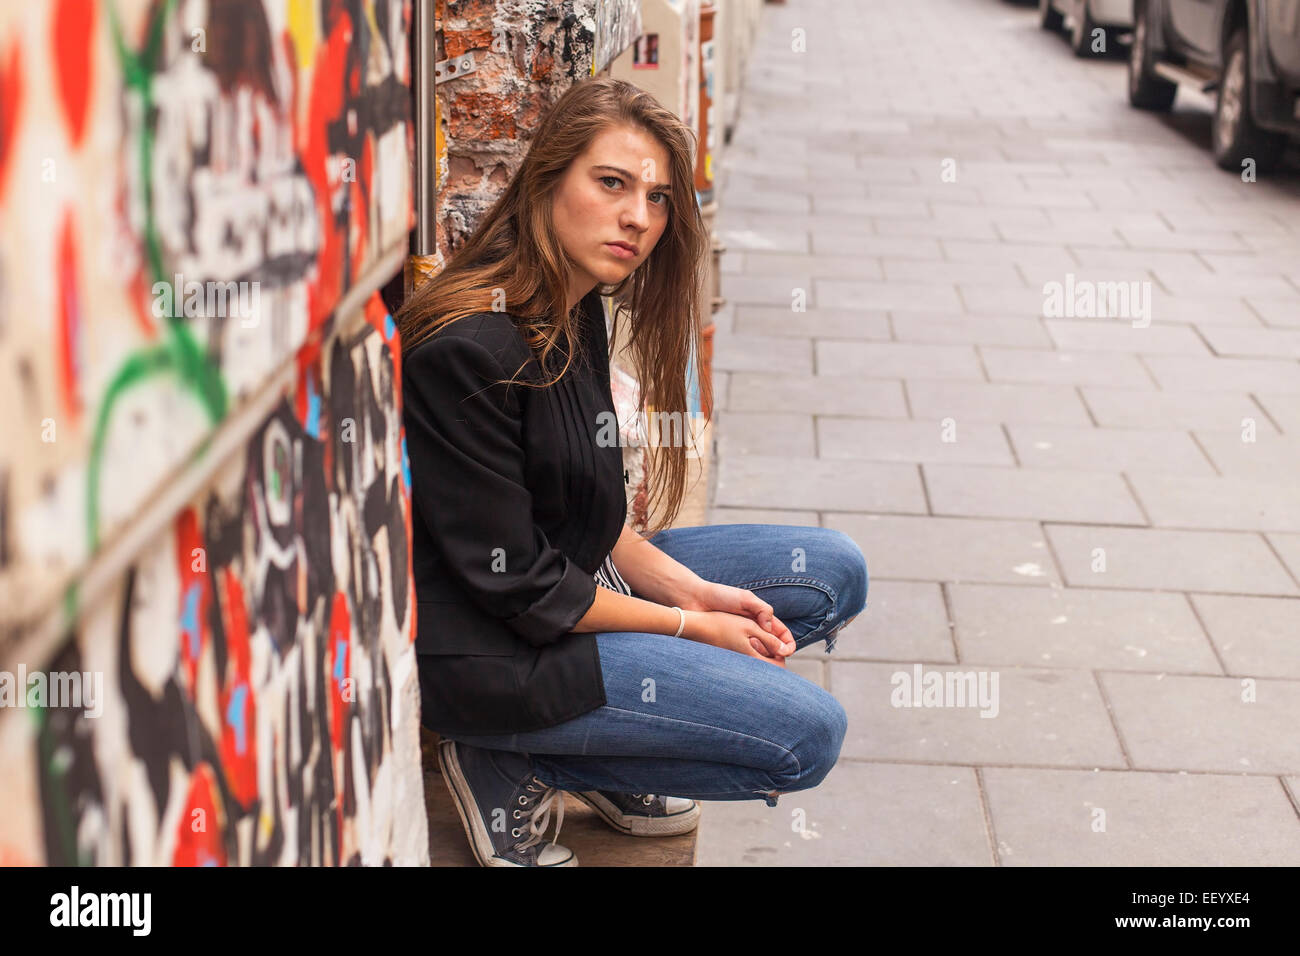 Hipster girl sitting on the street. Stock Photo